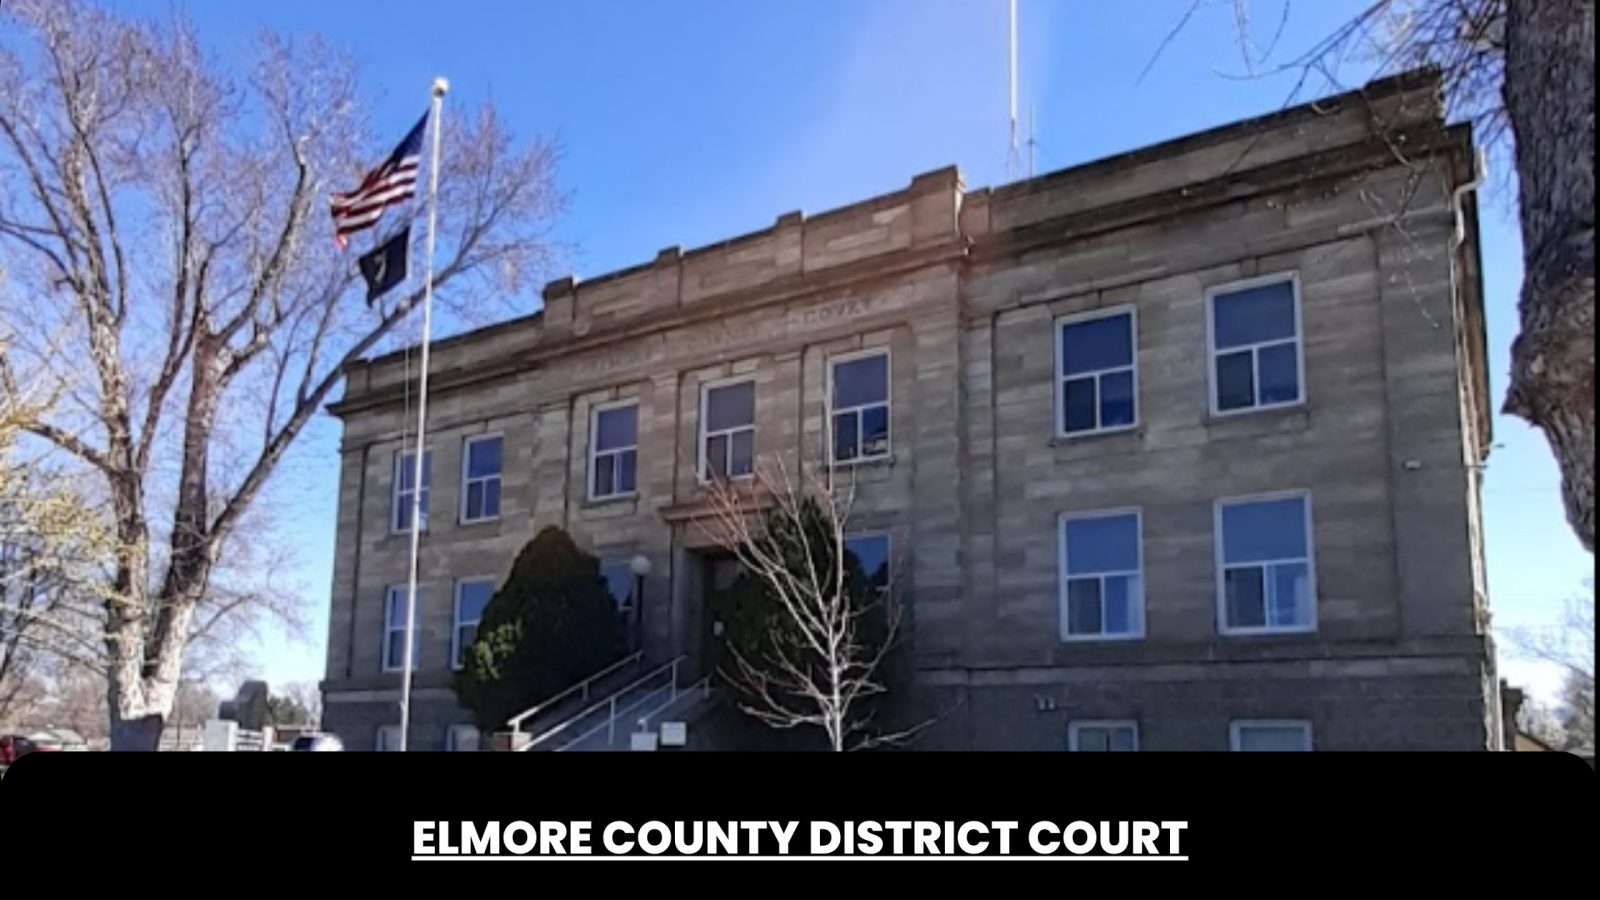 ELMORE COUNTY DISTRICT COURT 1